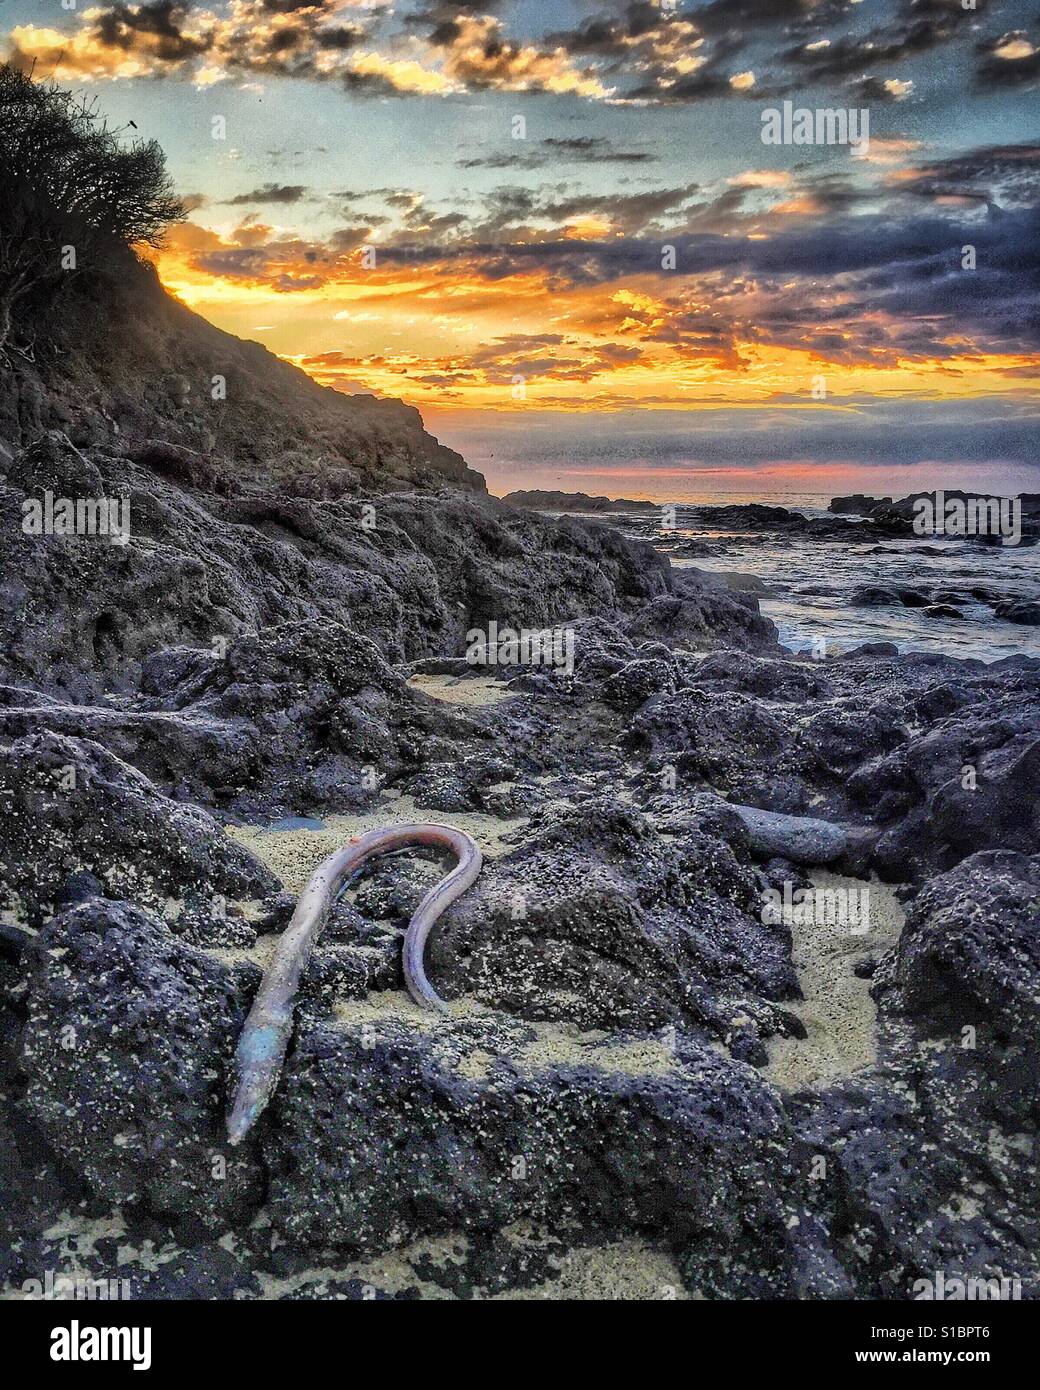 Sea creature washed up on the rocks on a remote beach in Nayarit with a beautiful sunset in the background. Stock Photo